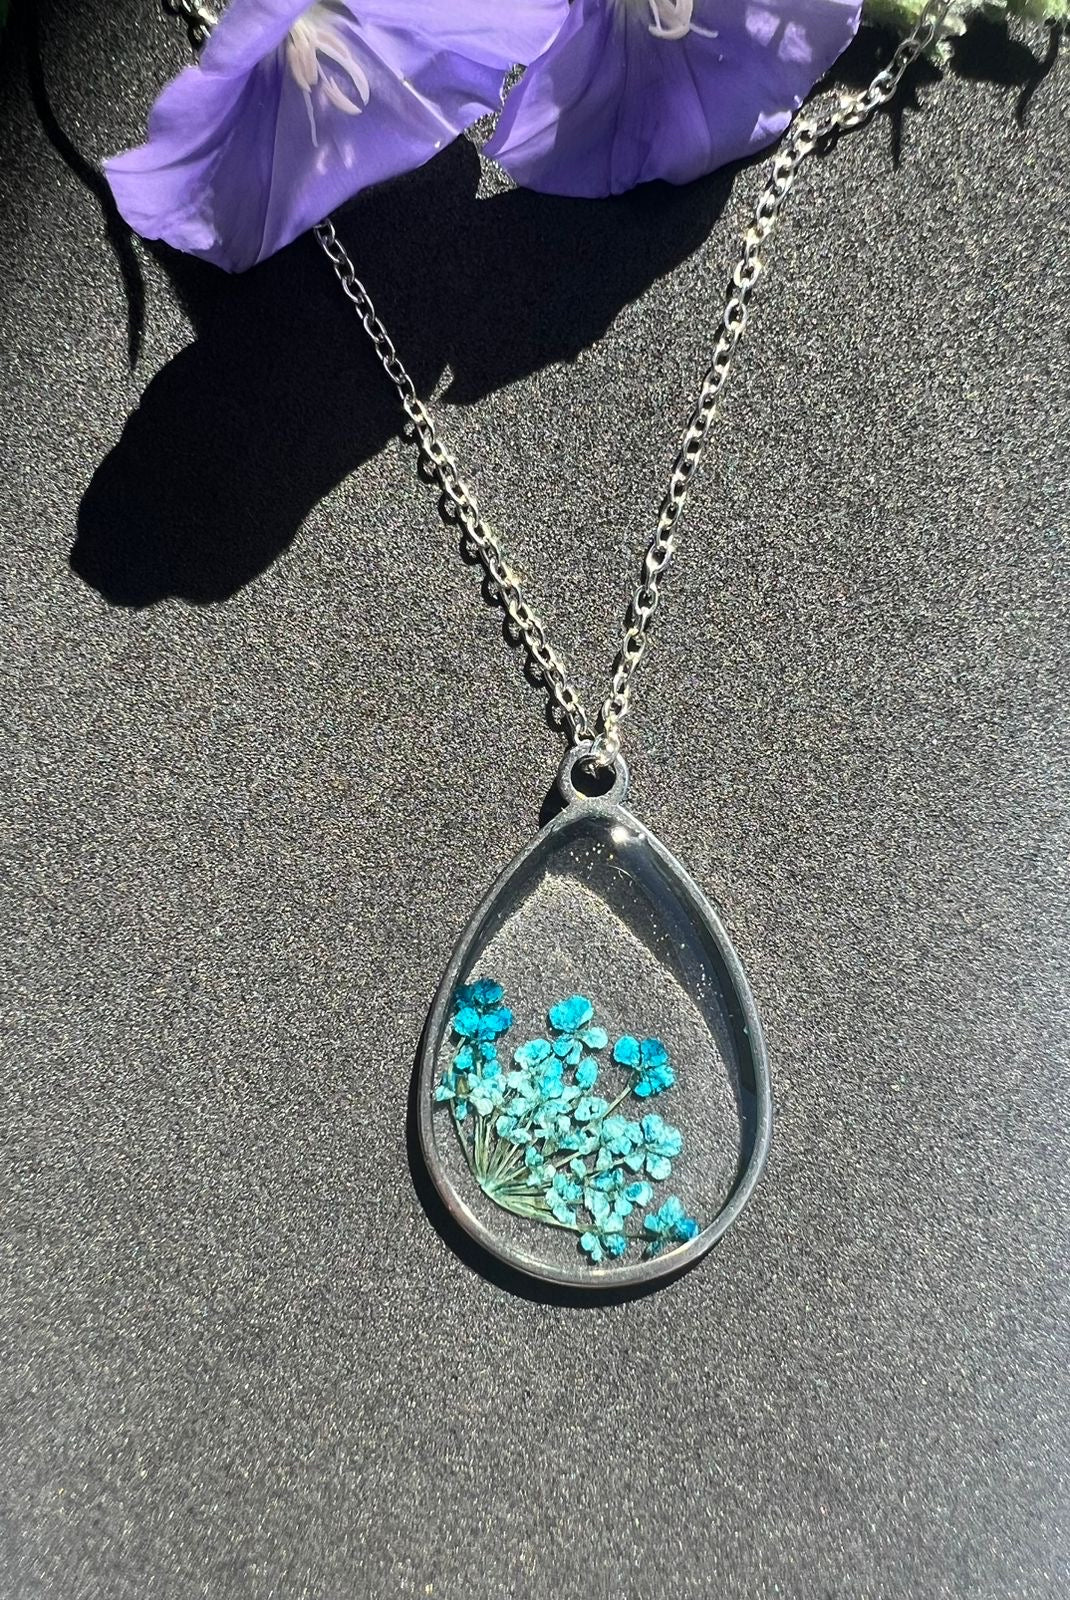 tear drop silver frame with tiny real blue flowers necklace gift birthday anniversary